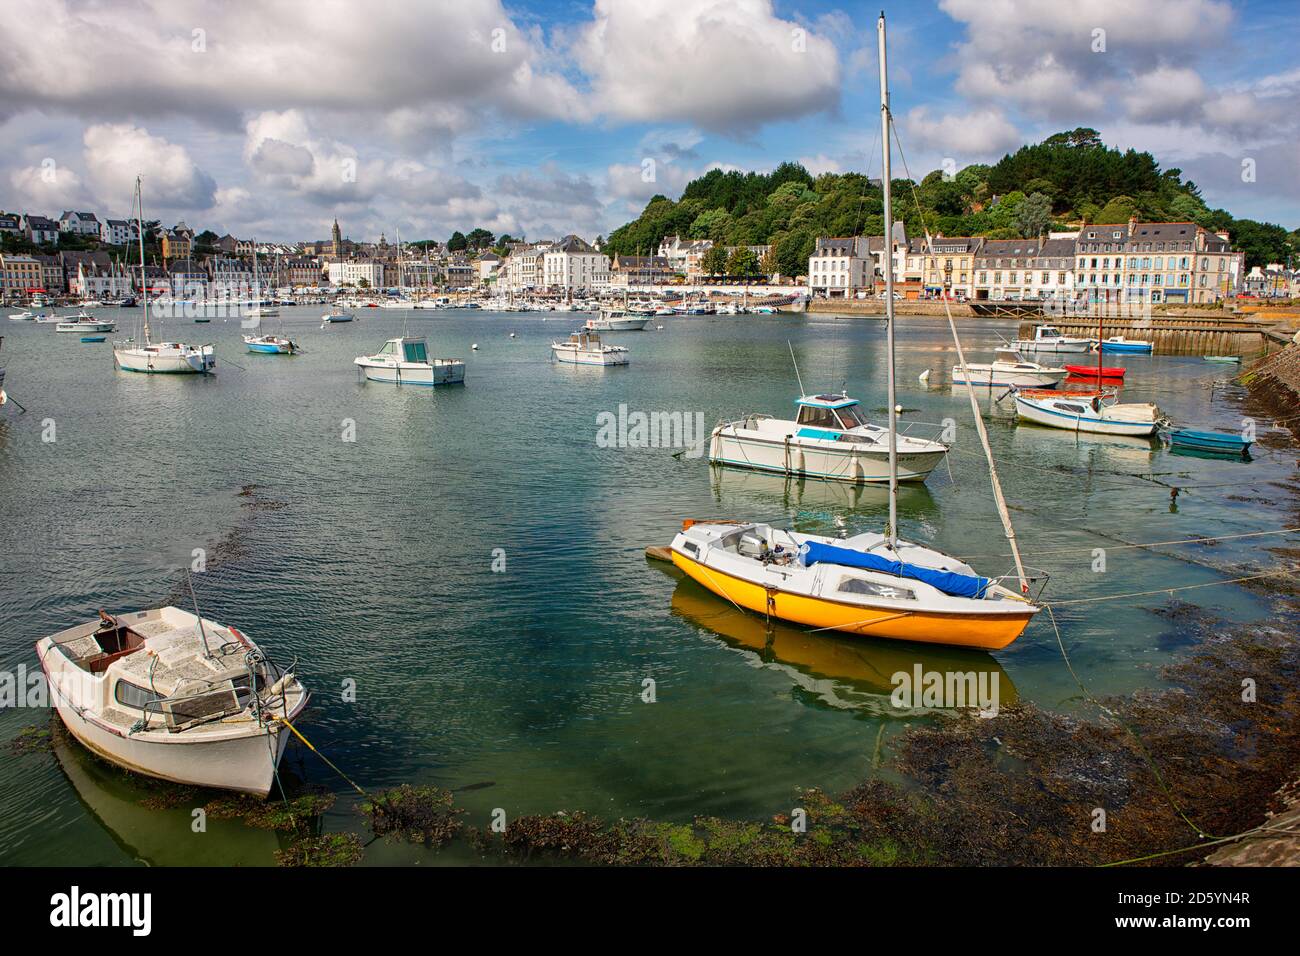 France, Brittany, Audierne, Boats at harbour Stock Photo